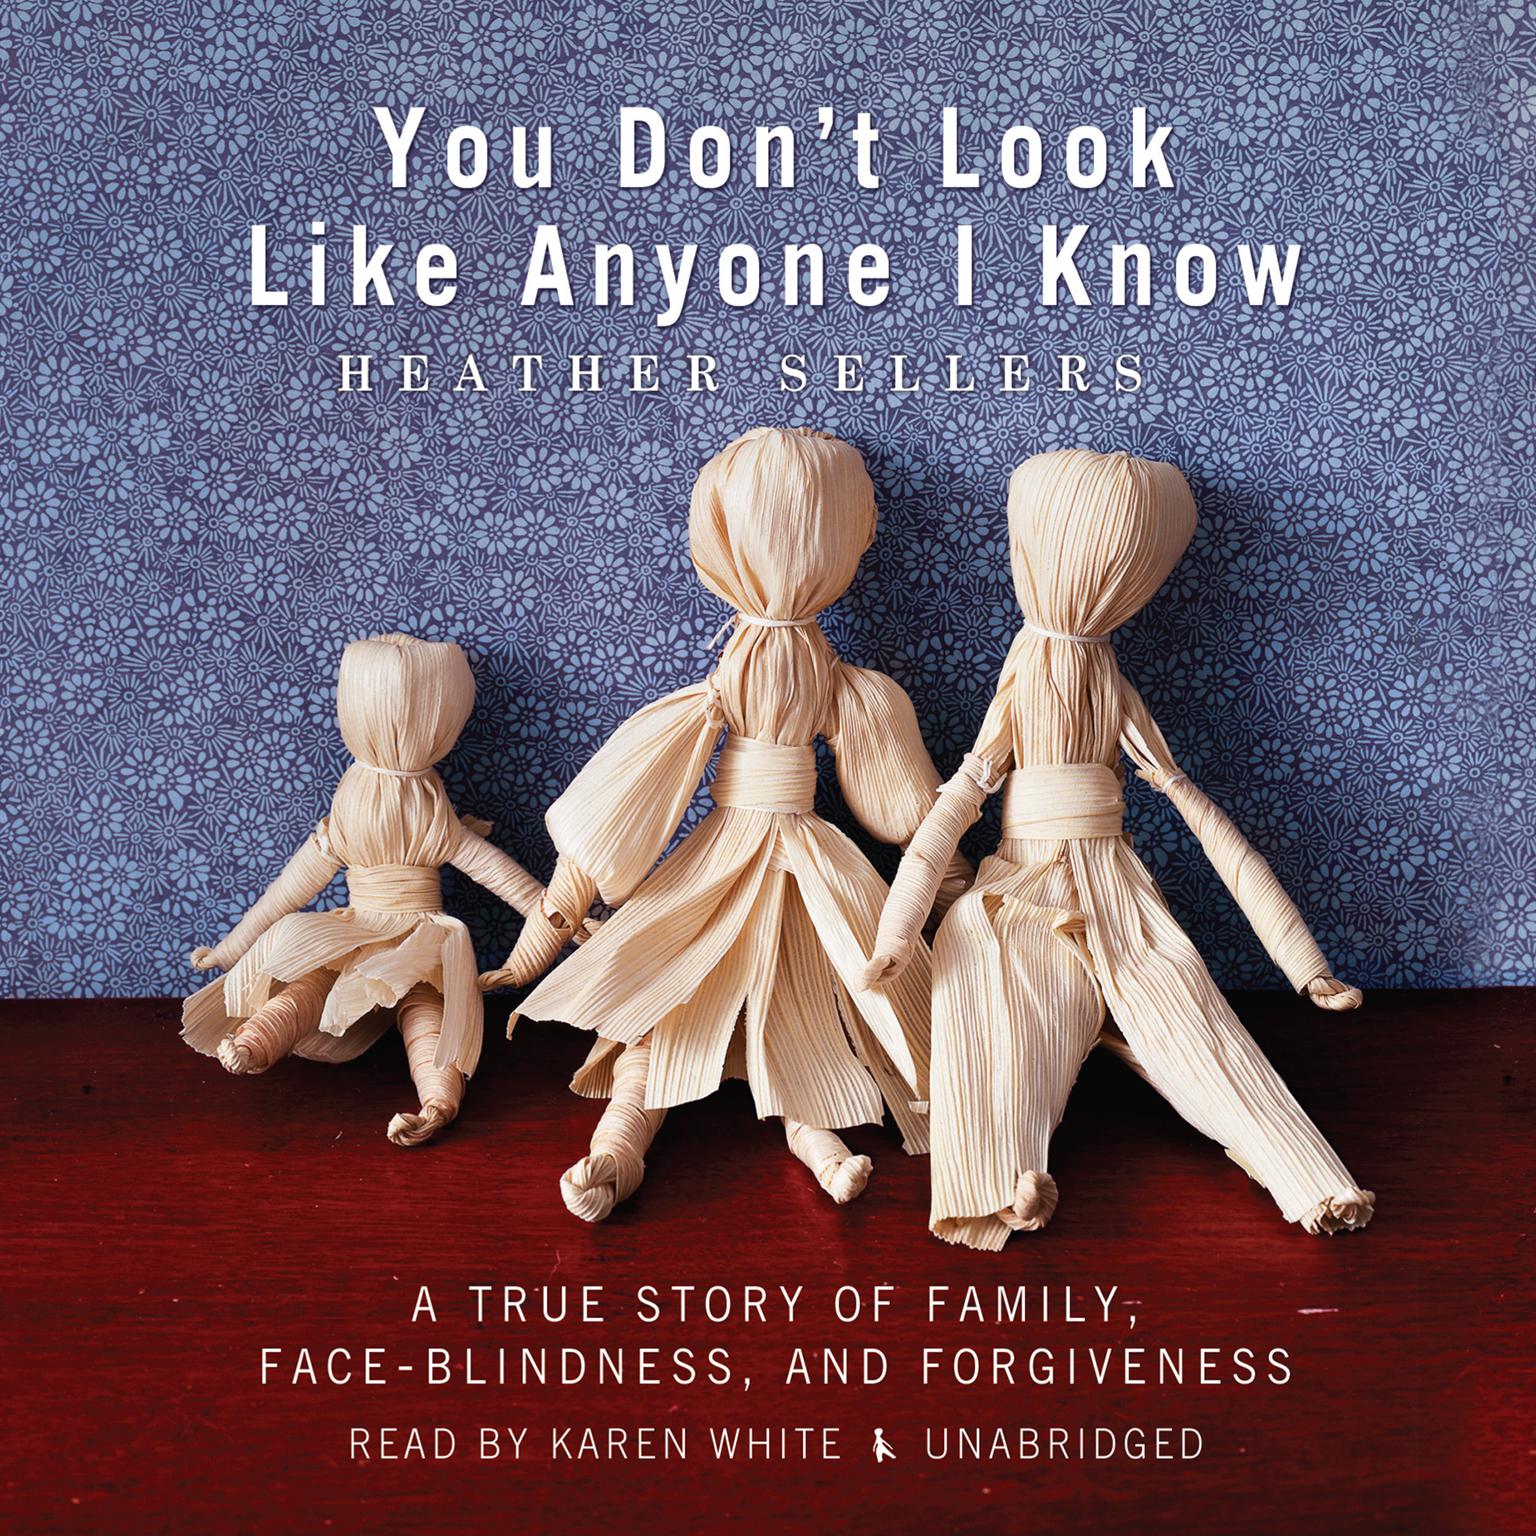 You Don’t Look Like Anyone I Know: A True Story of Family, Face Blindness, and Forgiveness Audiobook, by Heather Sellers